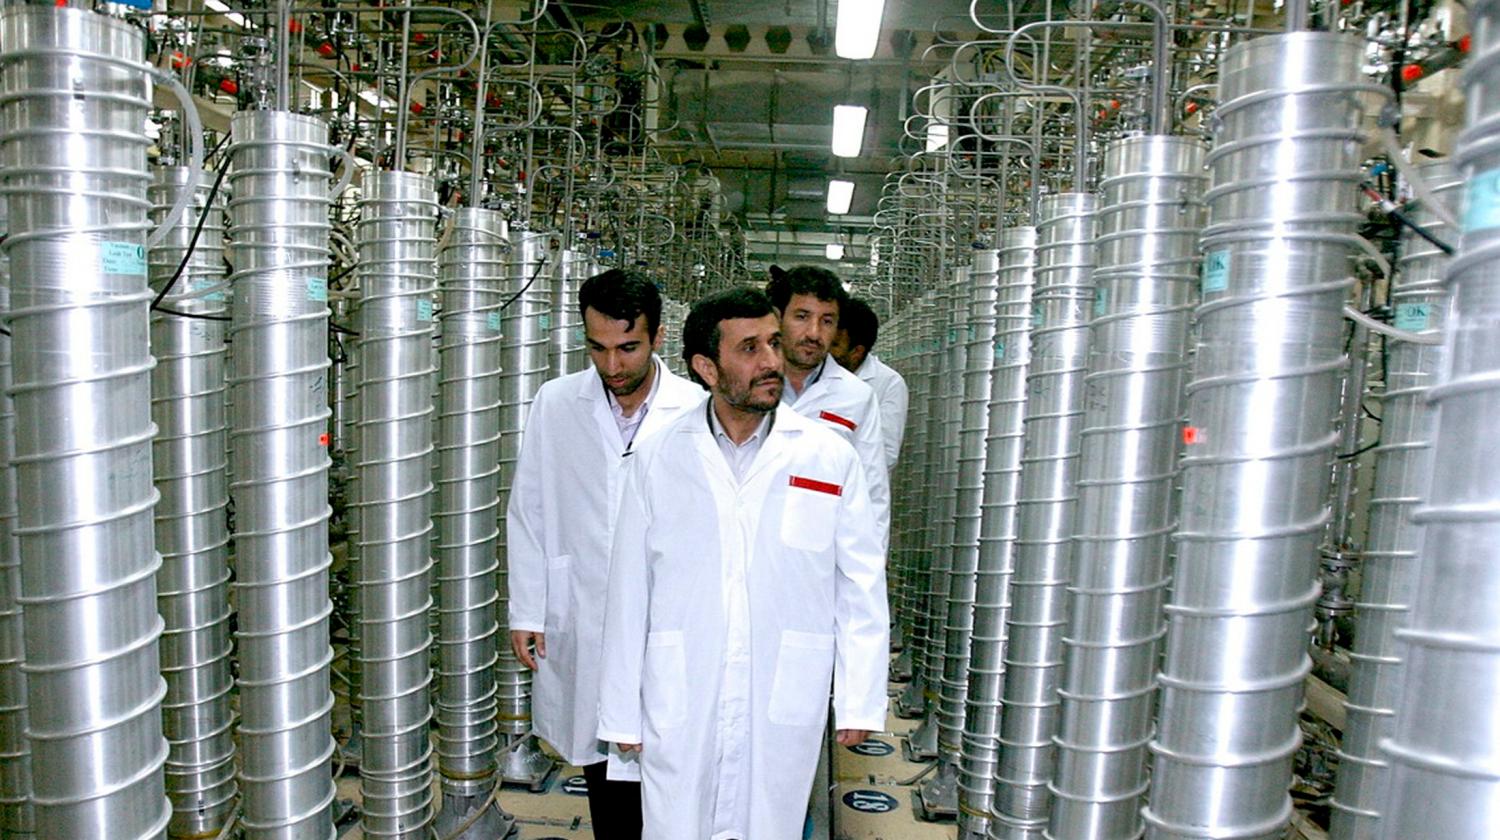 Iranian President Mahmoud Ahmadinejad visits the Natanz nuclear enrichment facility, 350 km (217 miles) south of Tehran, April 8, 2008. REUTERS/Presidential official website/Handout (IRAN).